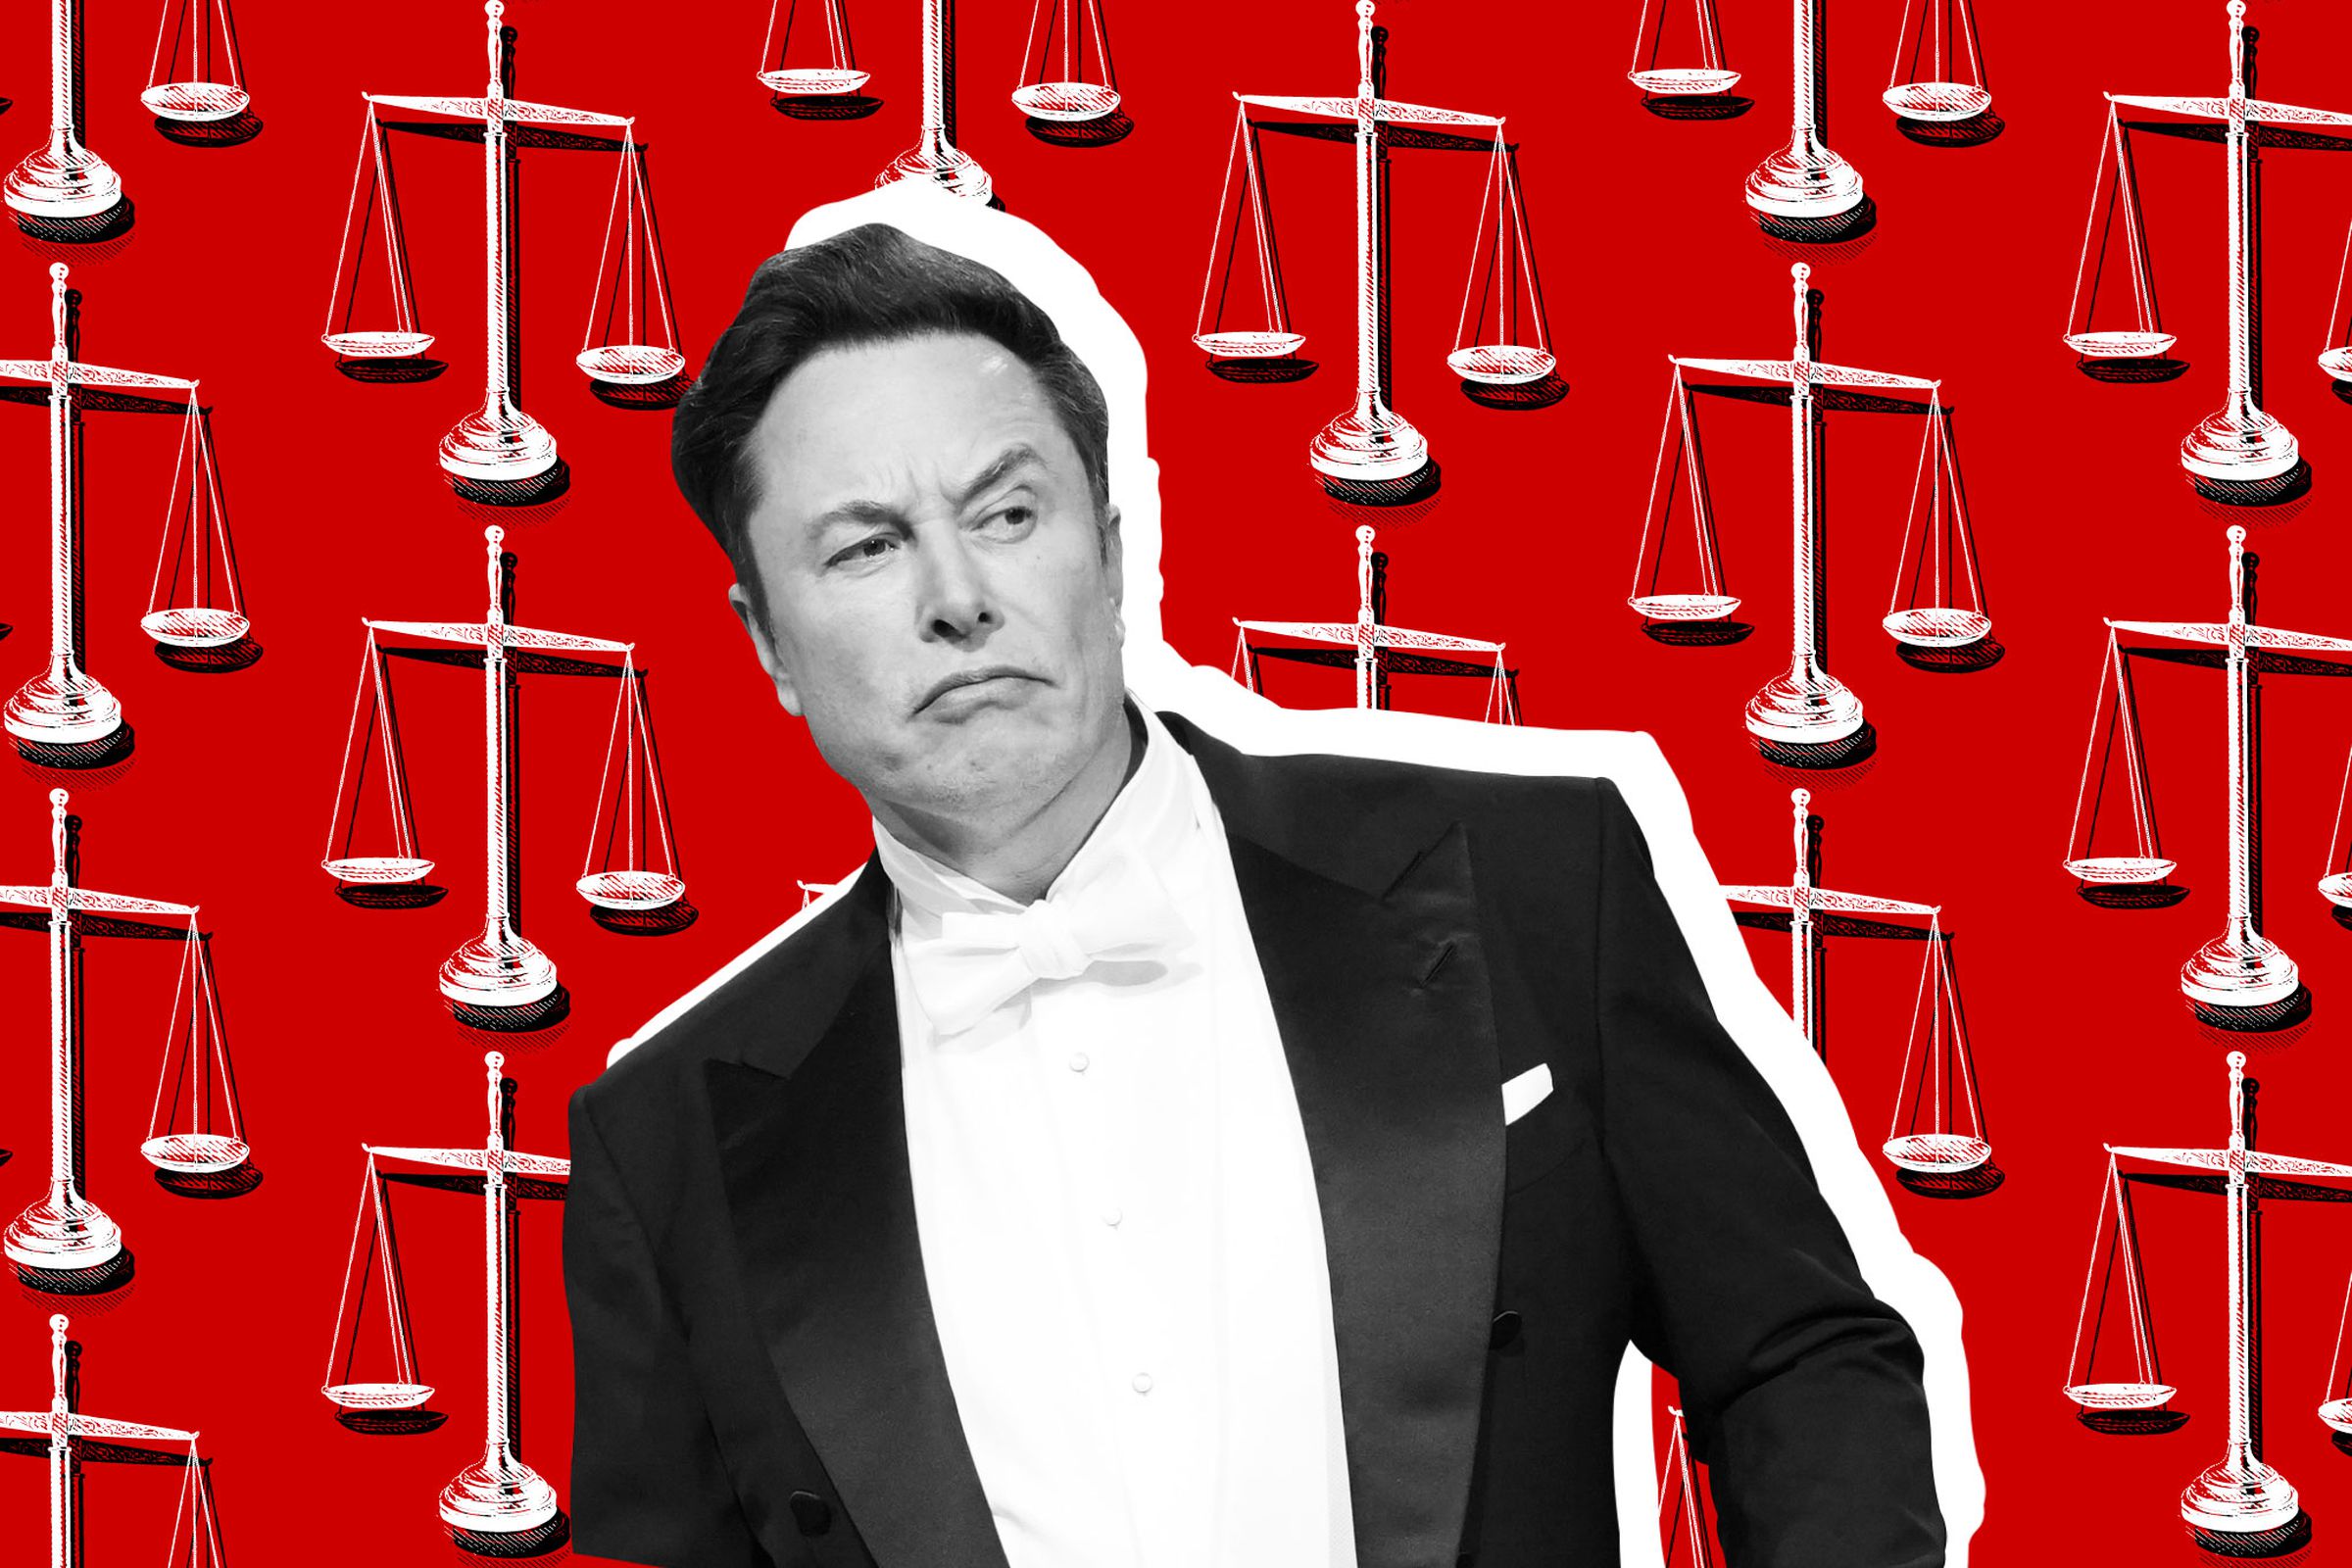 An image of Elon Musk in a tuxedo making an odd face. The background is red with weight scales on it.